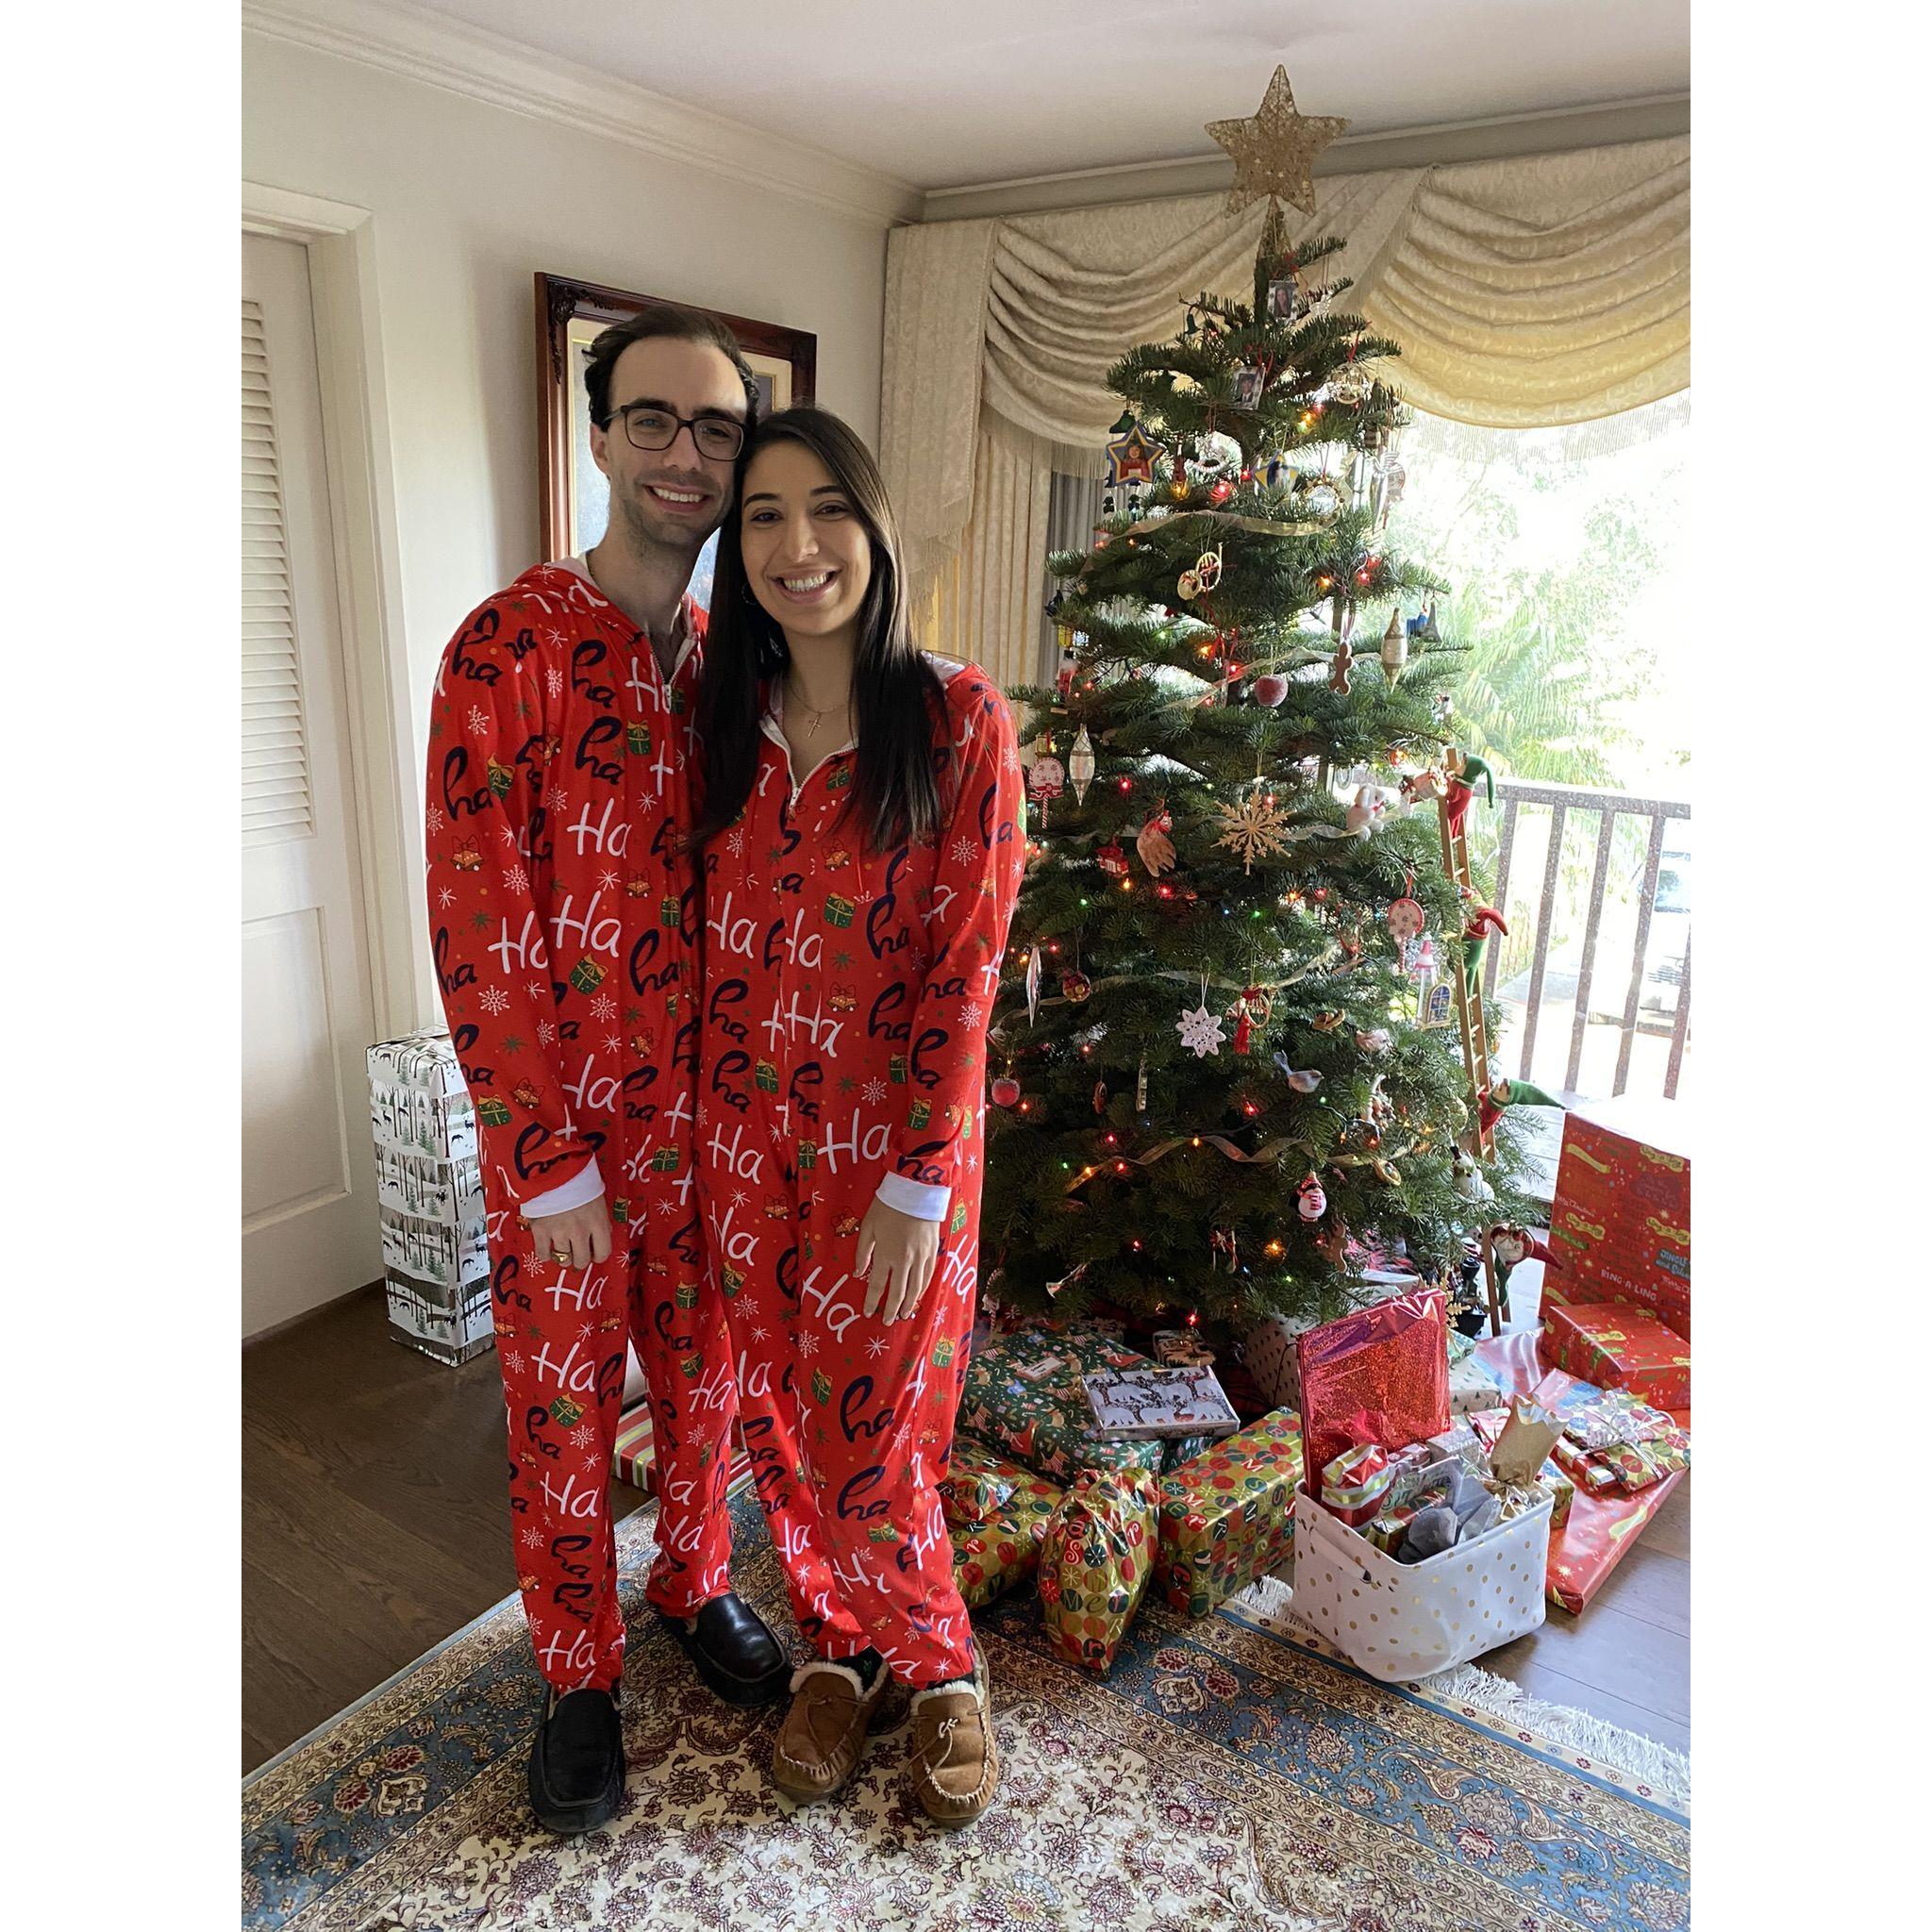 Matching onsies for Christmas morning